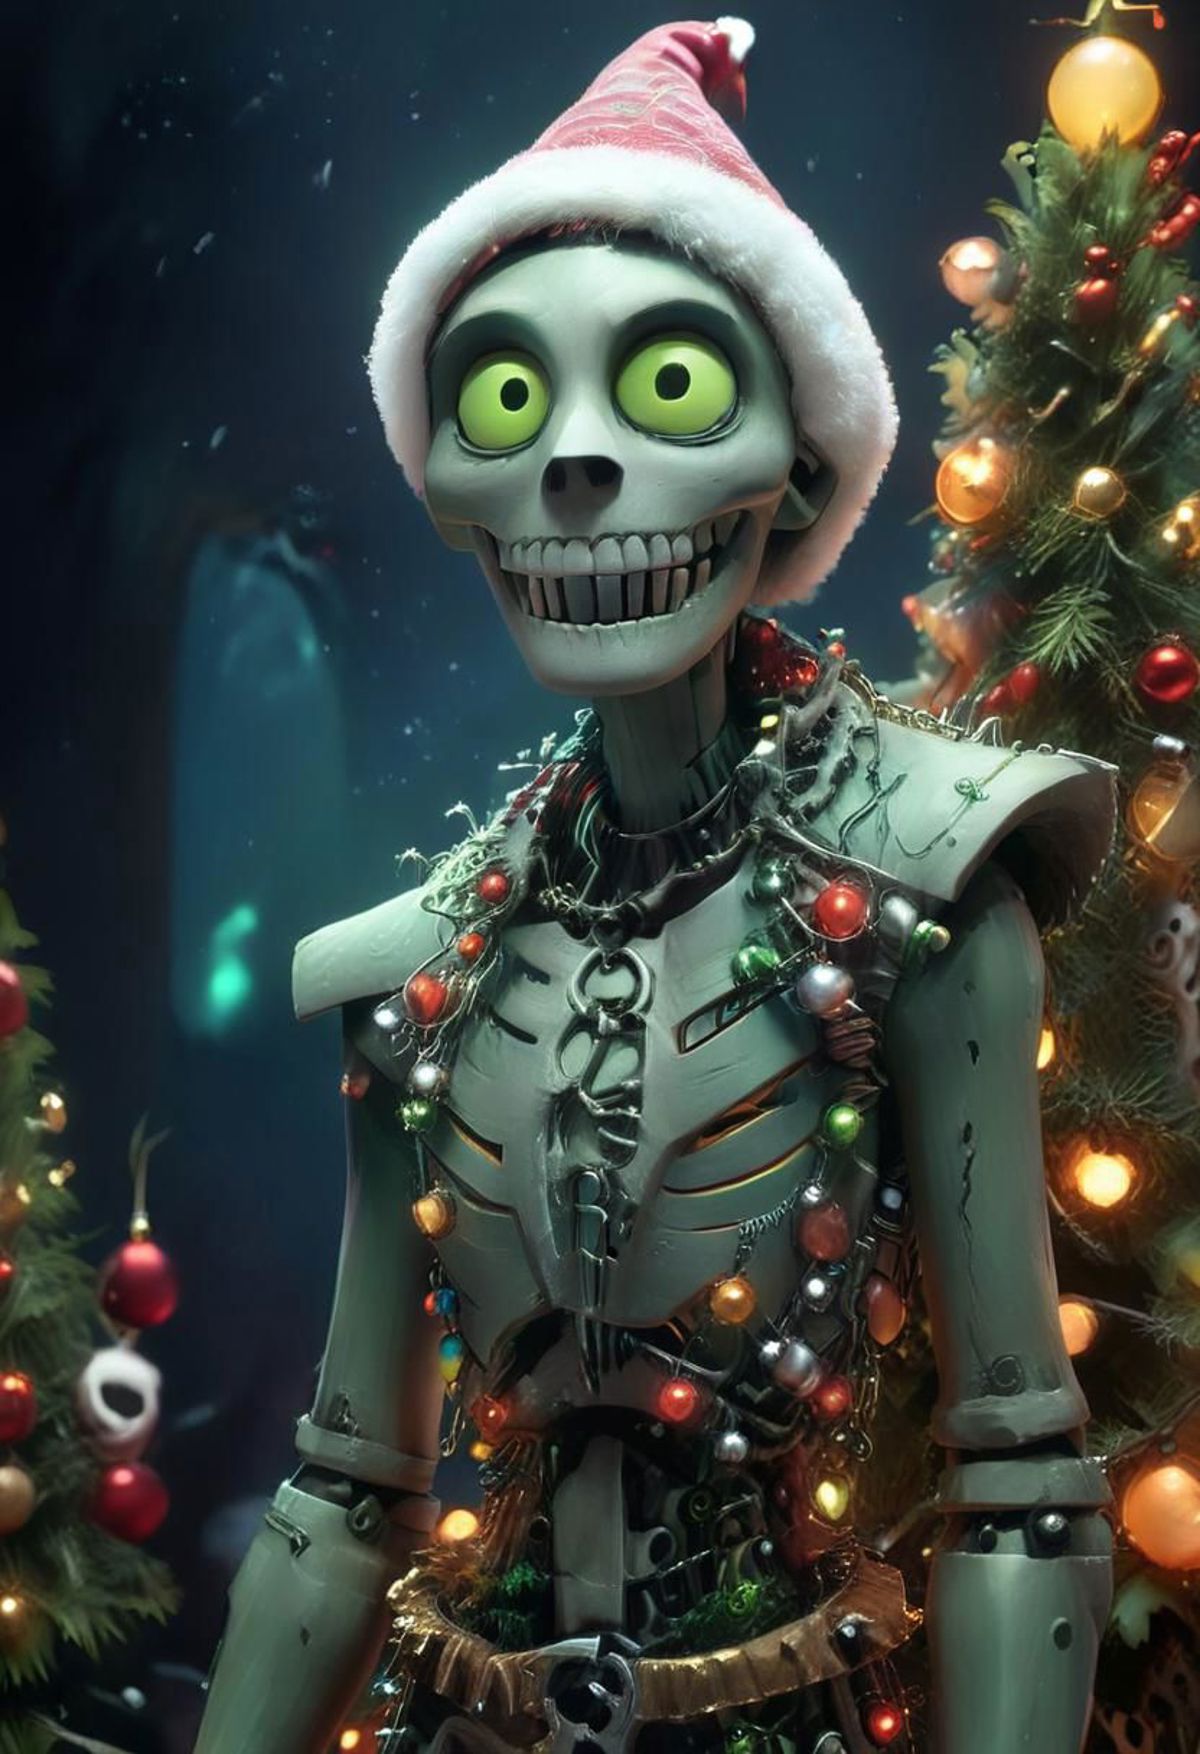 A creepy skeleton with green eyes and a Santa hat stands in front of a Christmas tree.